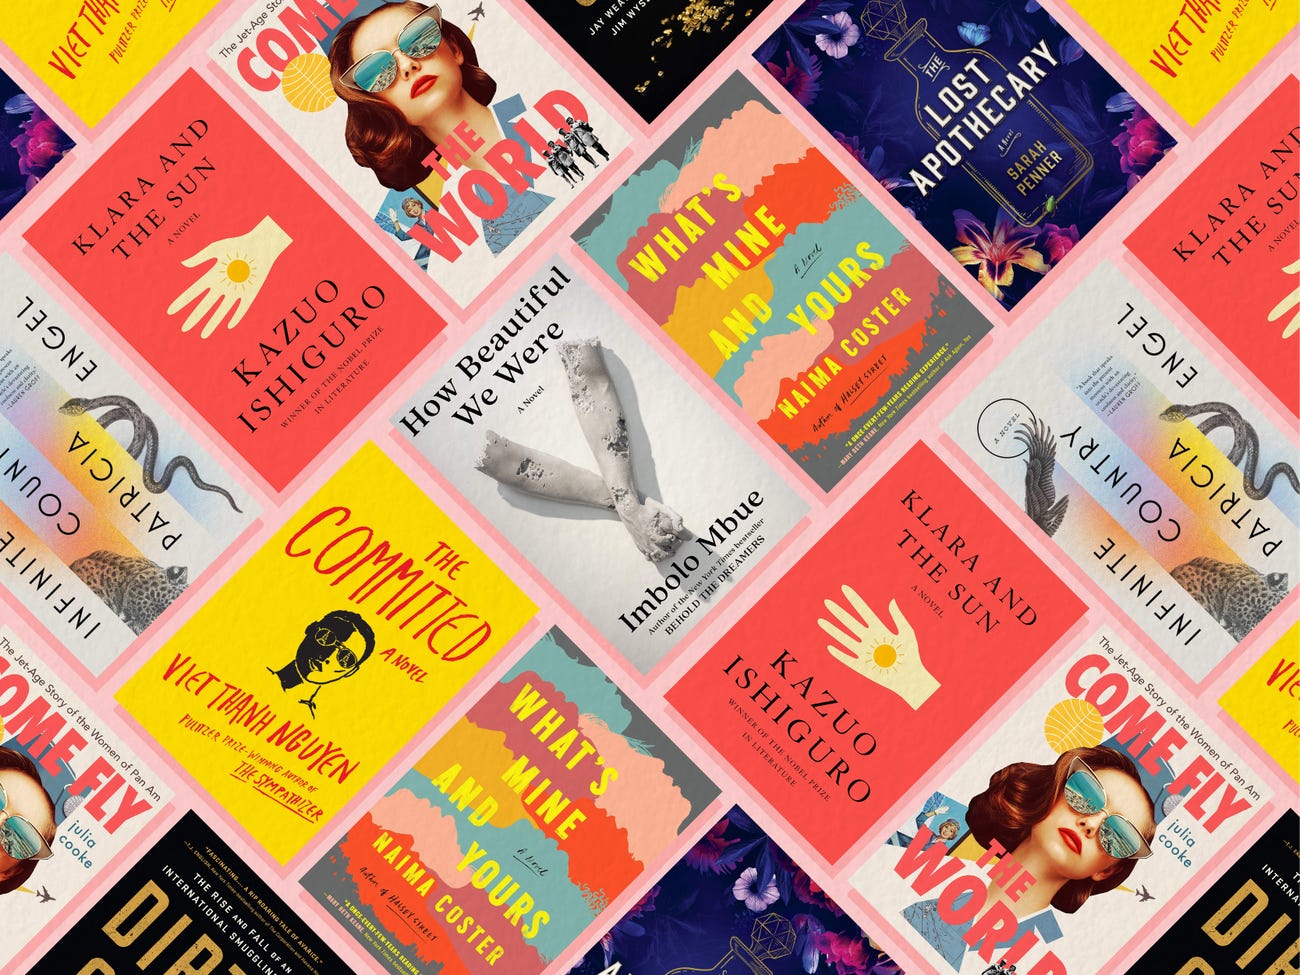 Frontlist | The best books of March 2021, according to Amazon's editors